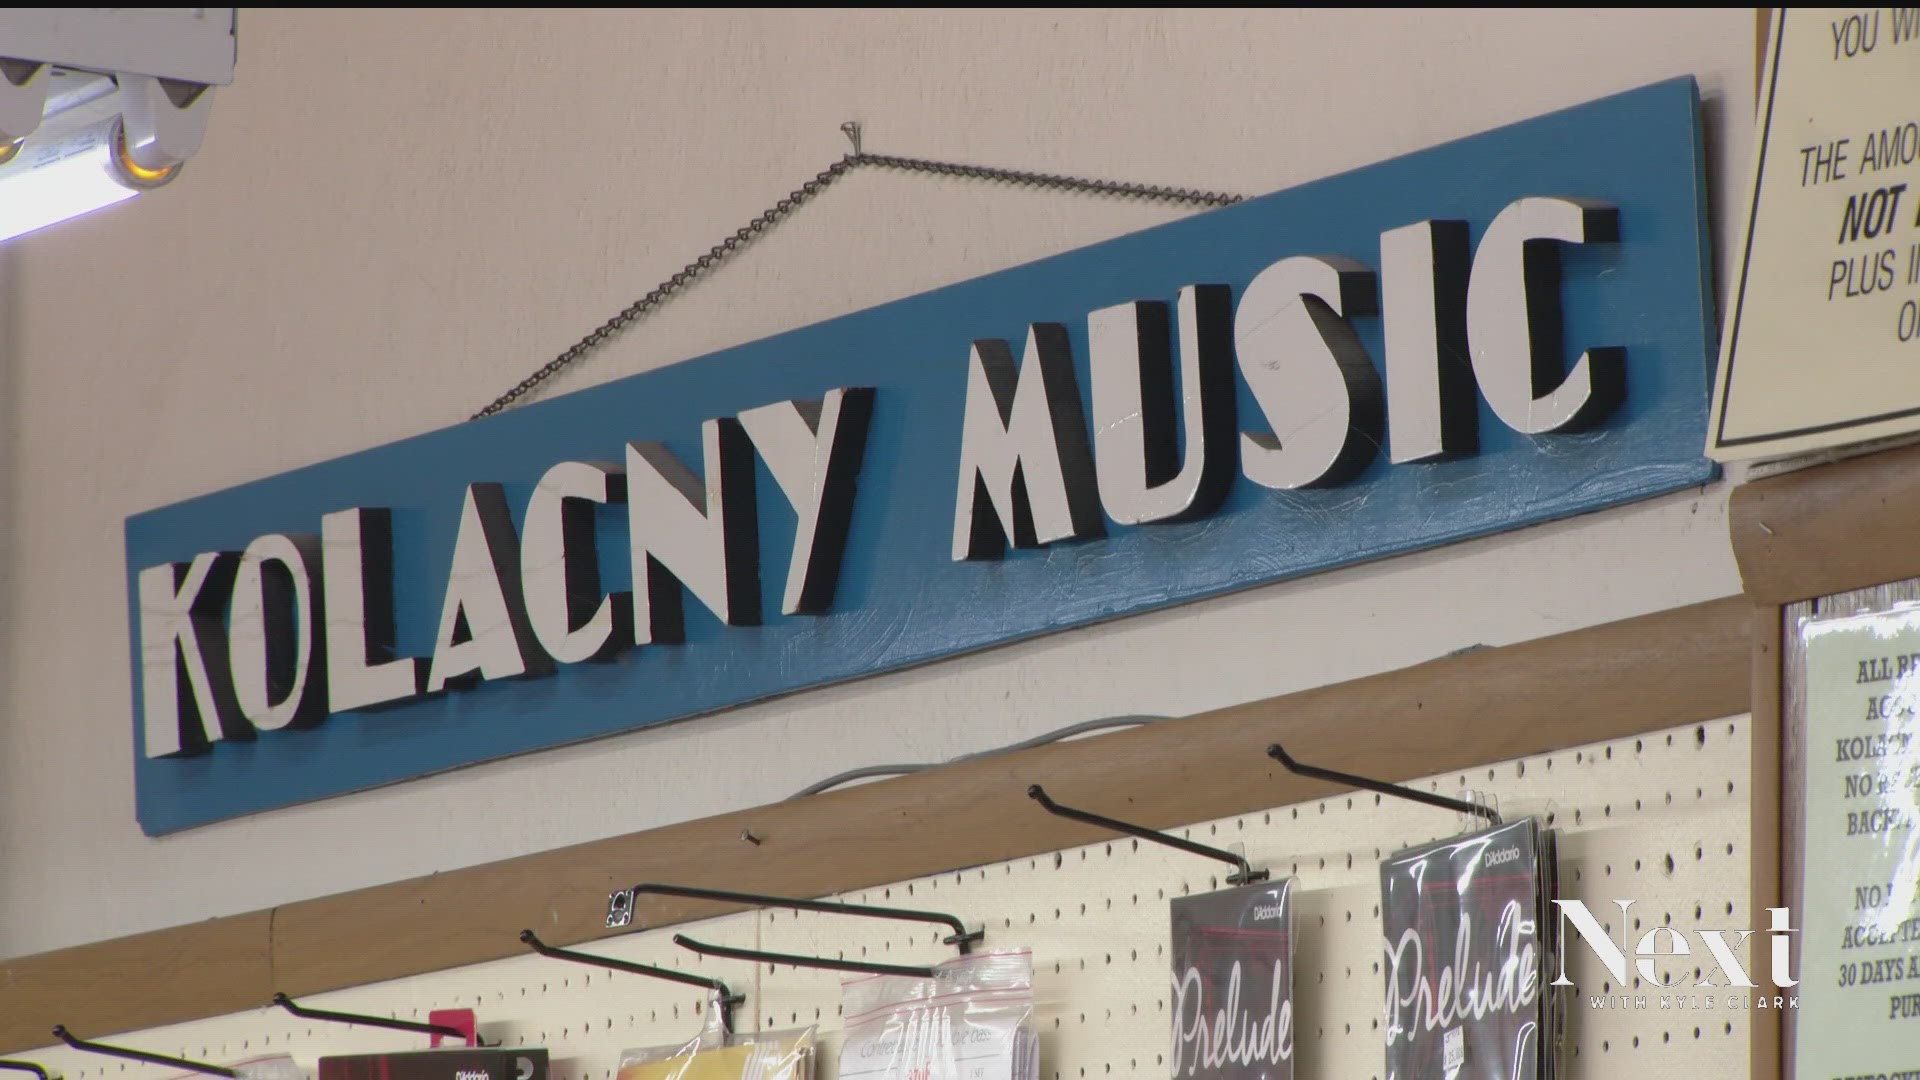 For almost a century, the family business has provided instruments to local musicians and schools. Now, they're closing to make room for the next generation.